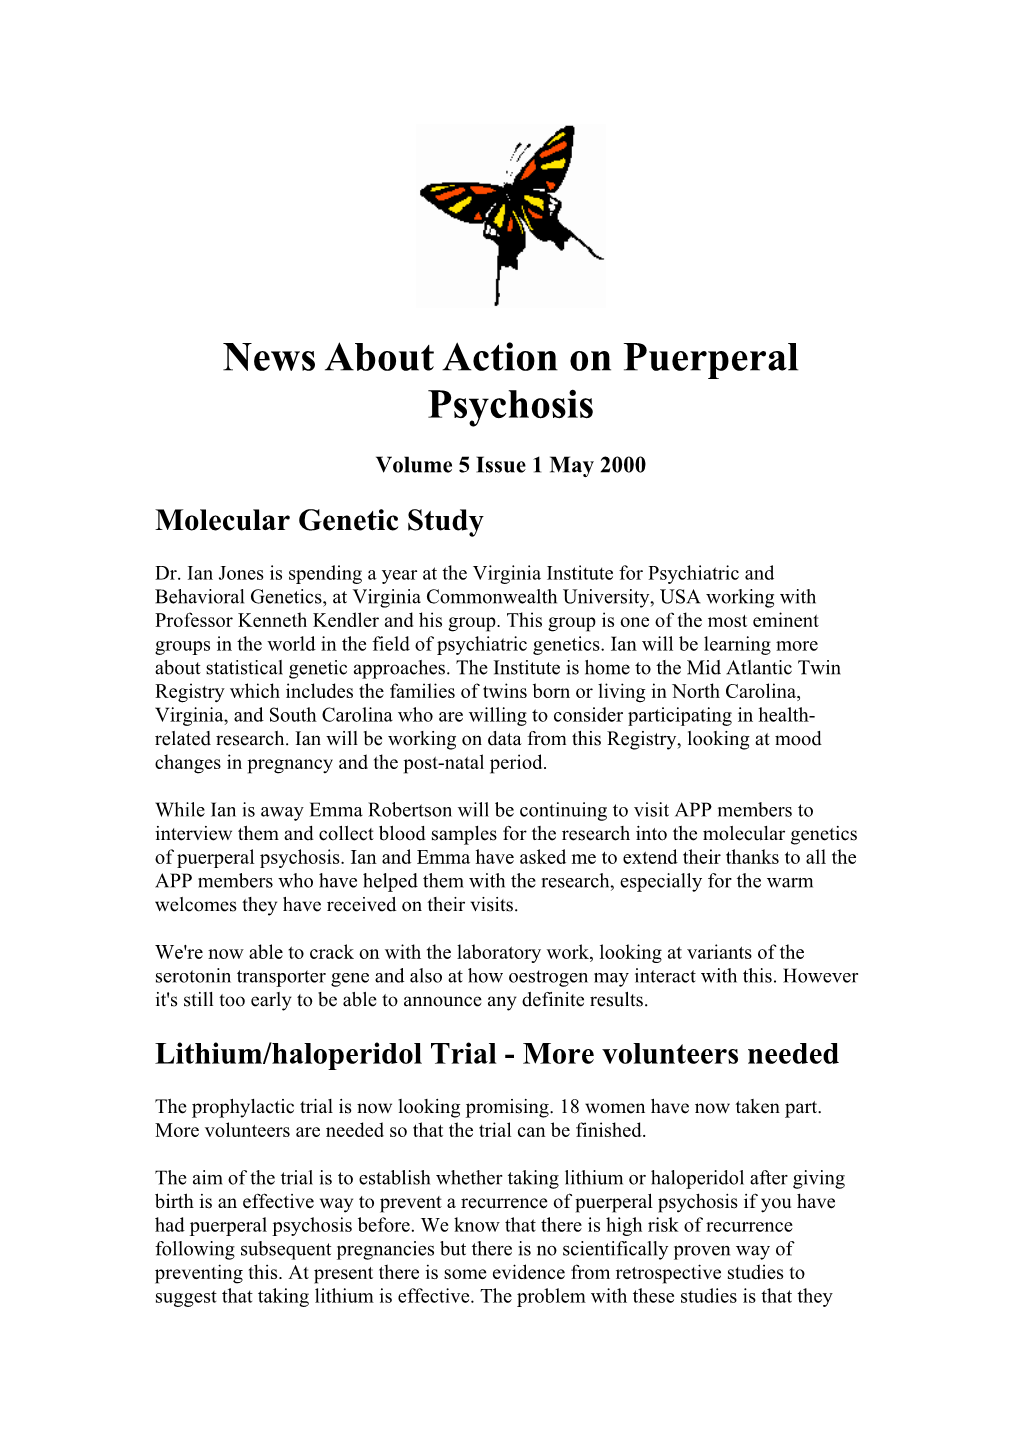 News About Action on Puerperal Psychosis